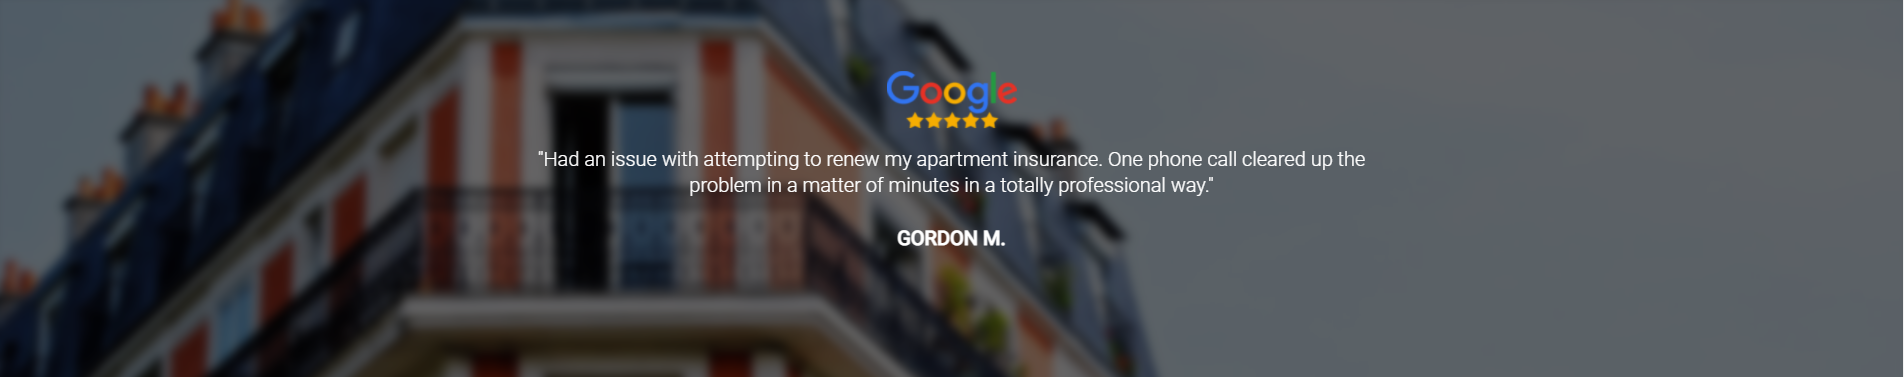 Testimonial from Gordon M, one phone call and apartment insurance done fast